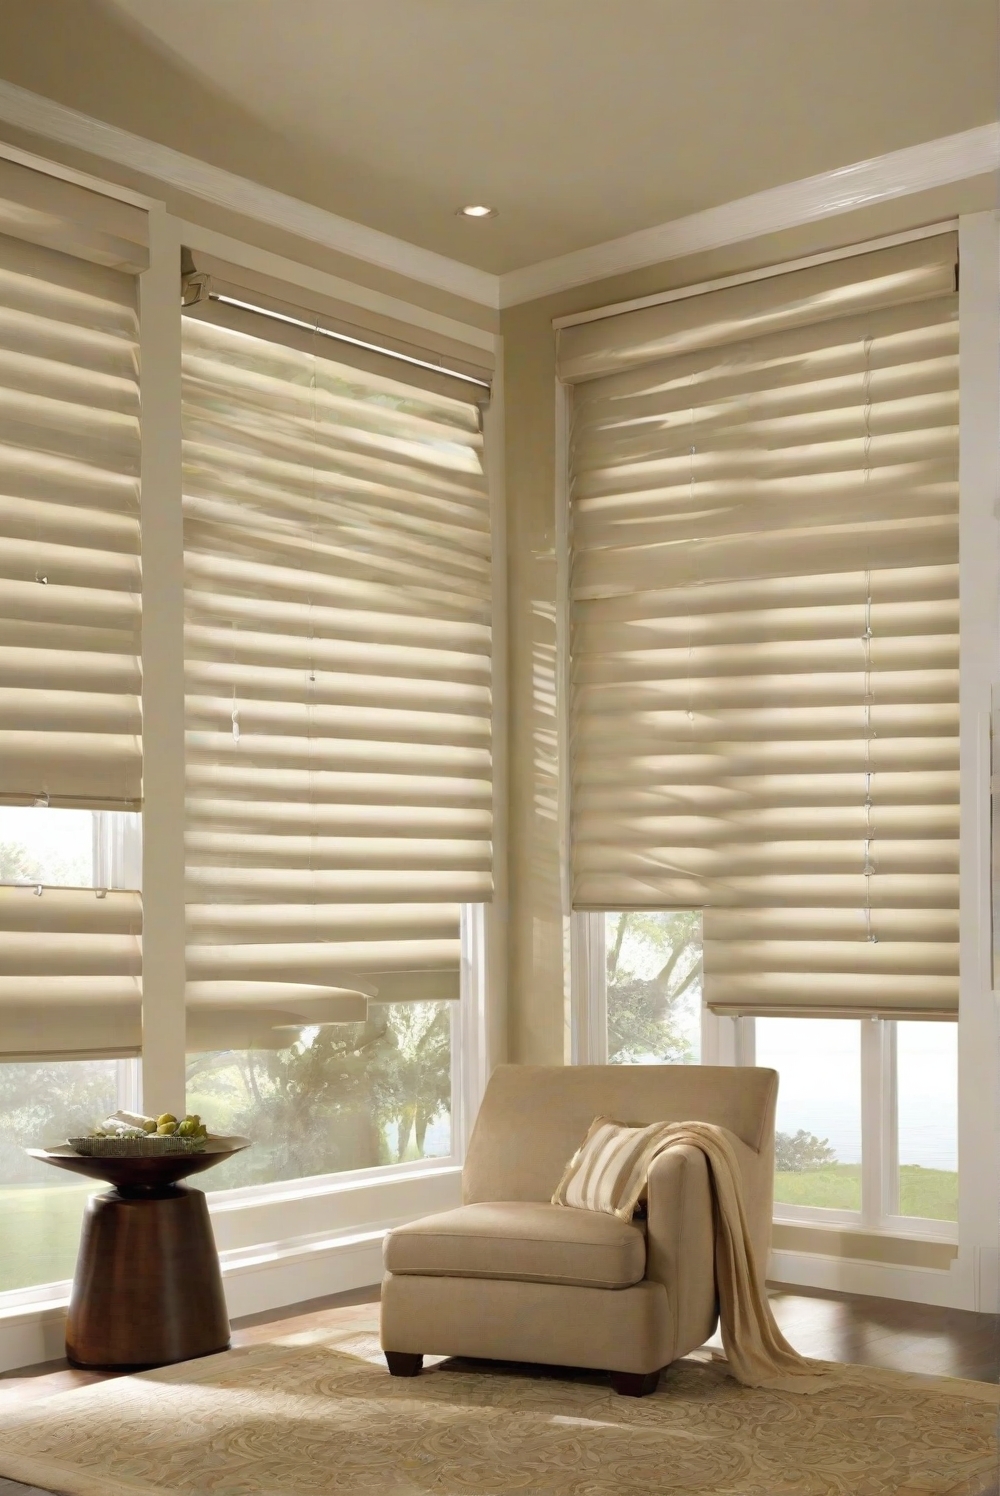 blinds for windows,custom window treatments,window treatment ideas,wooden blinds,vertical blinds,shades for windows,roller blinds